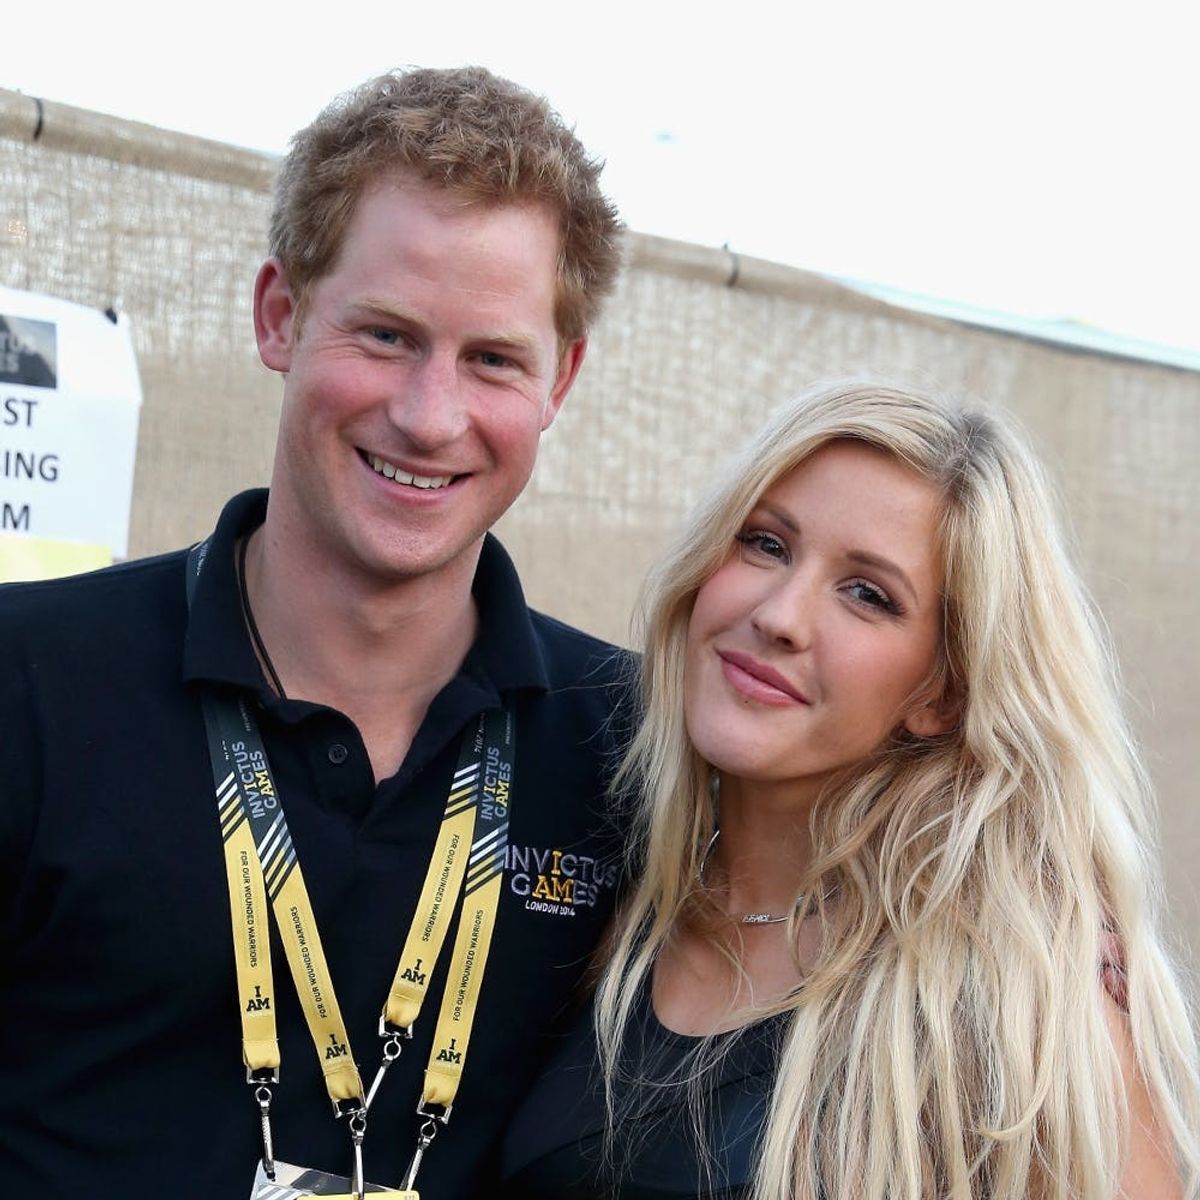 Prince Harry and Ellie Goulding Might Be an Item